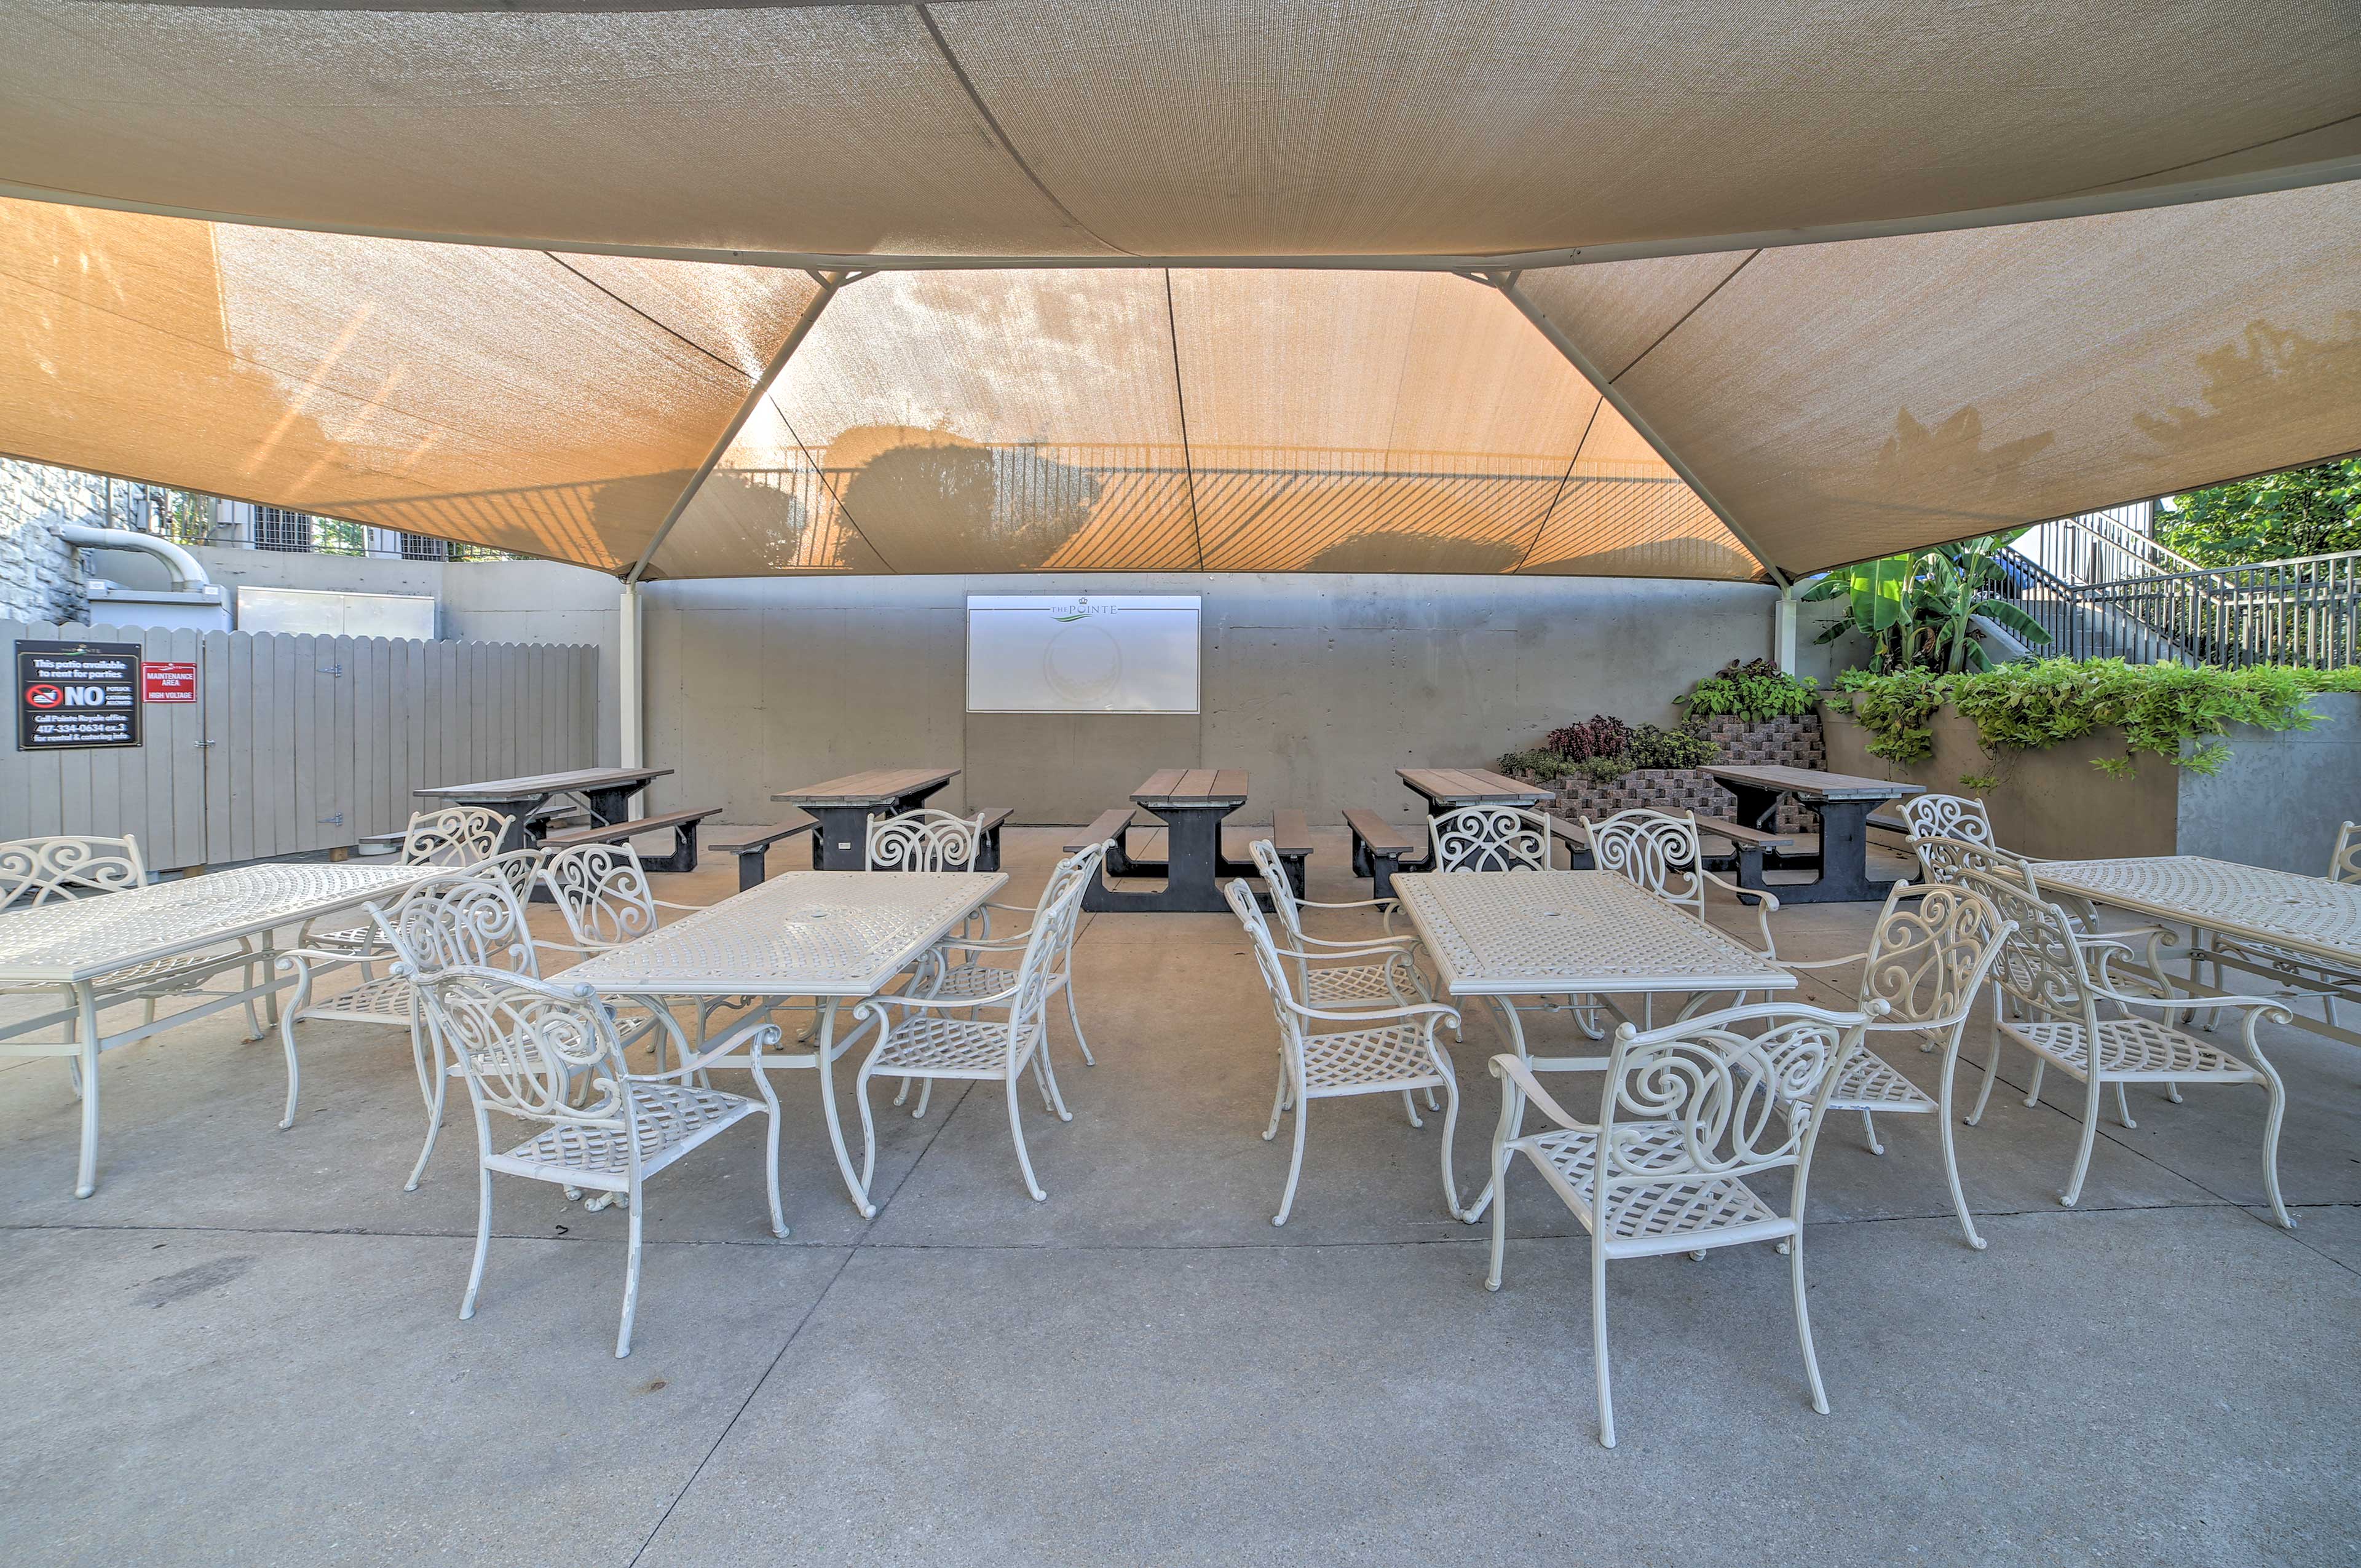 Dine outside at your leisure under the canopied communal dining area.